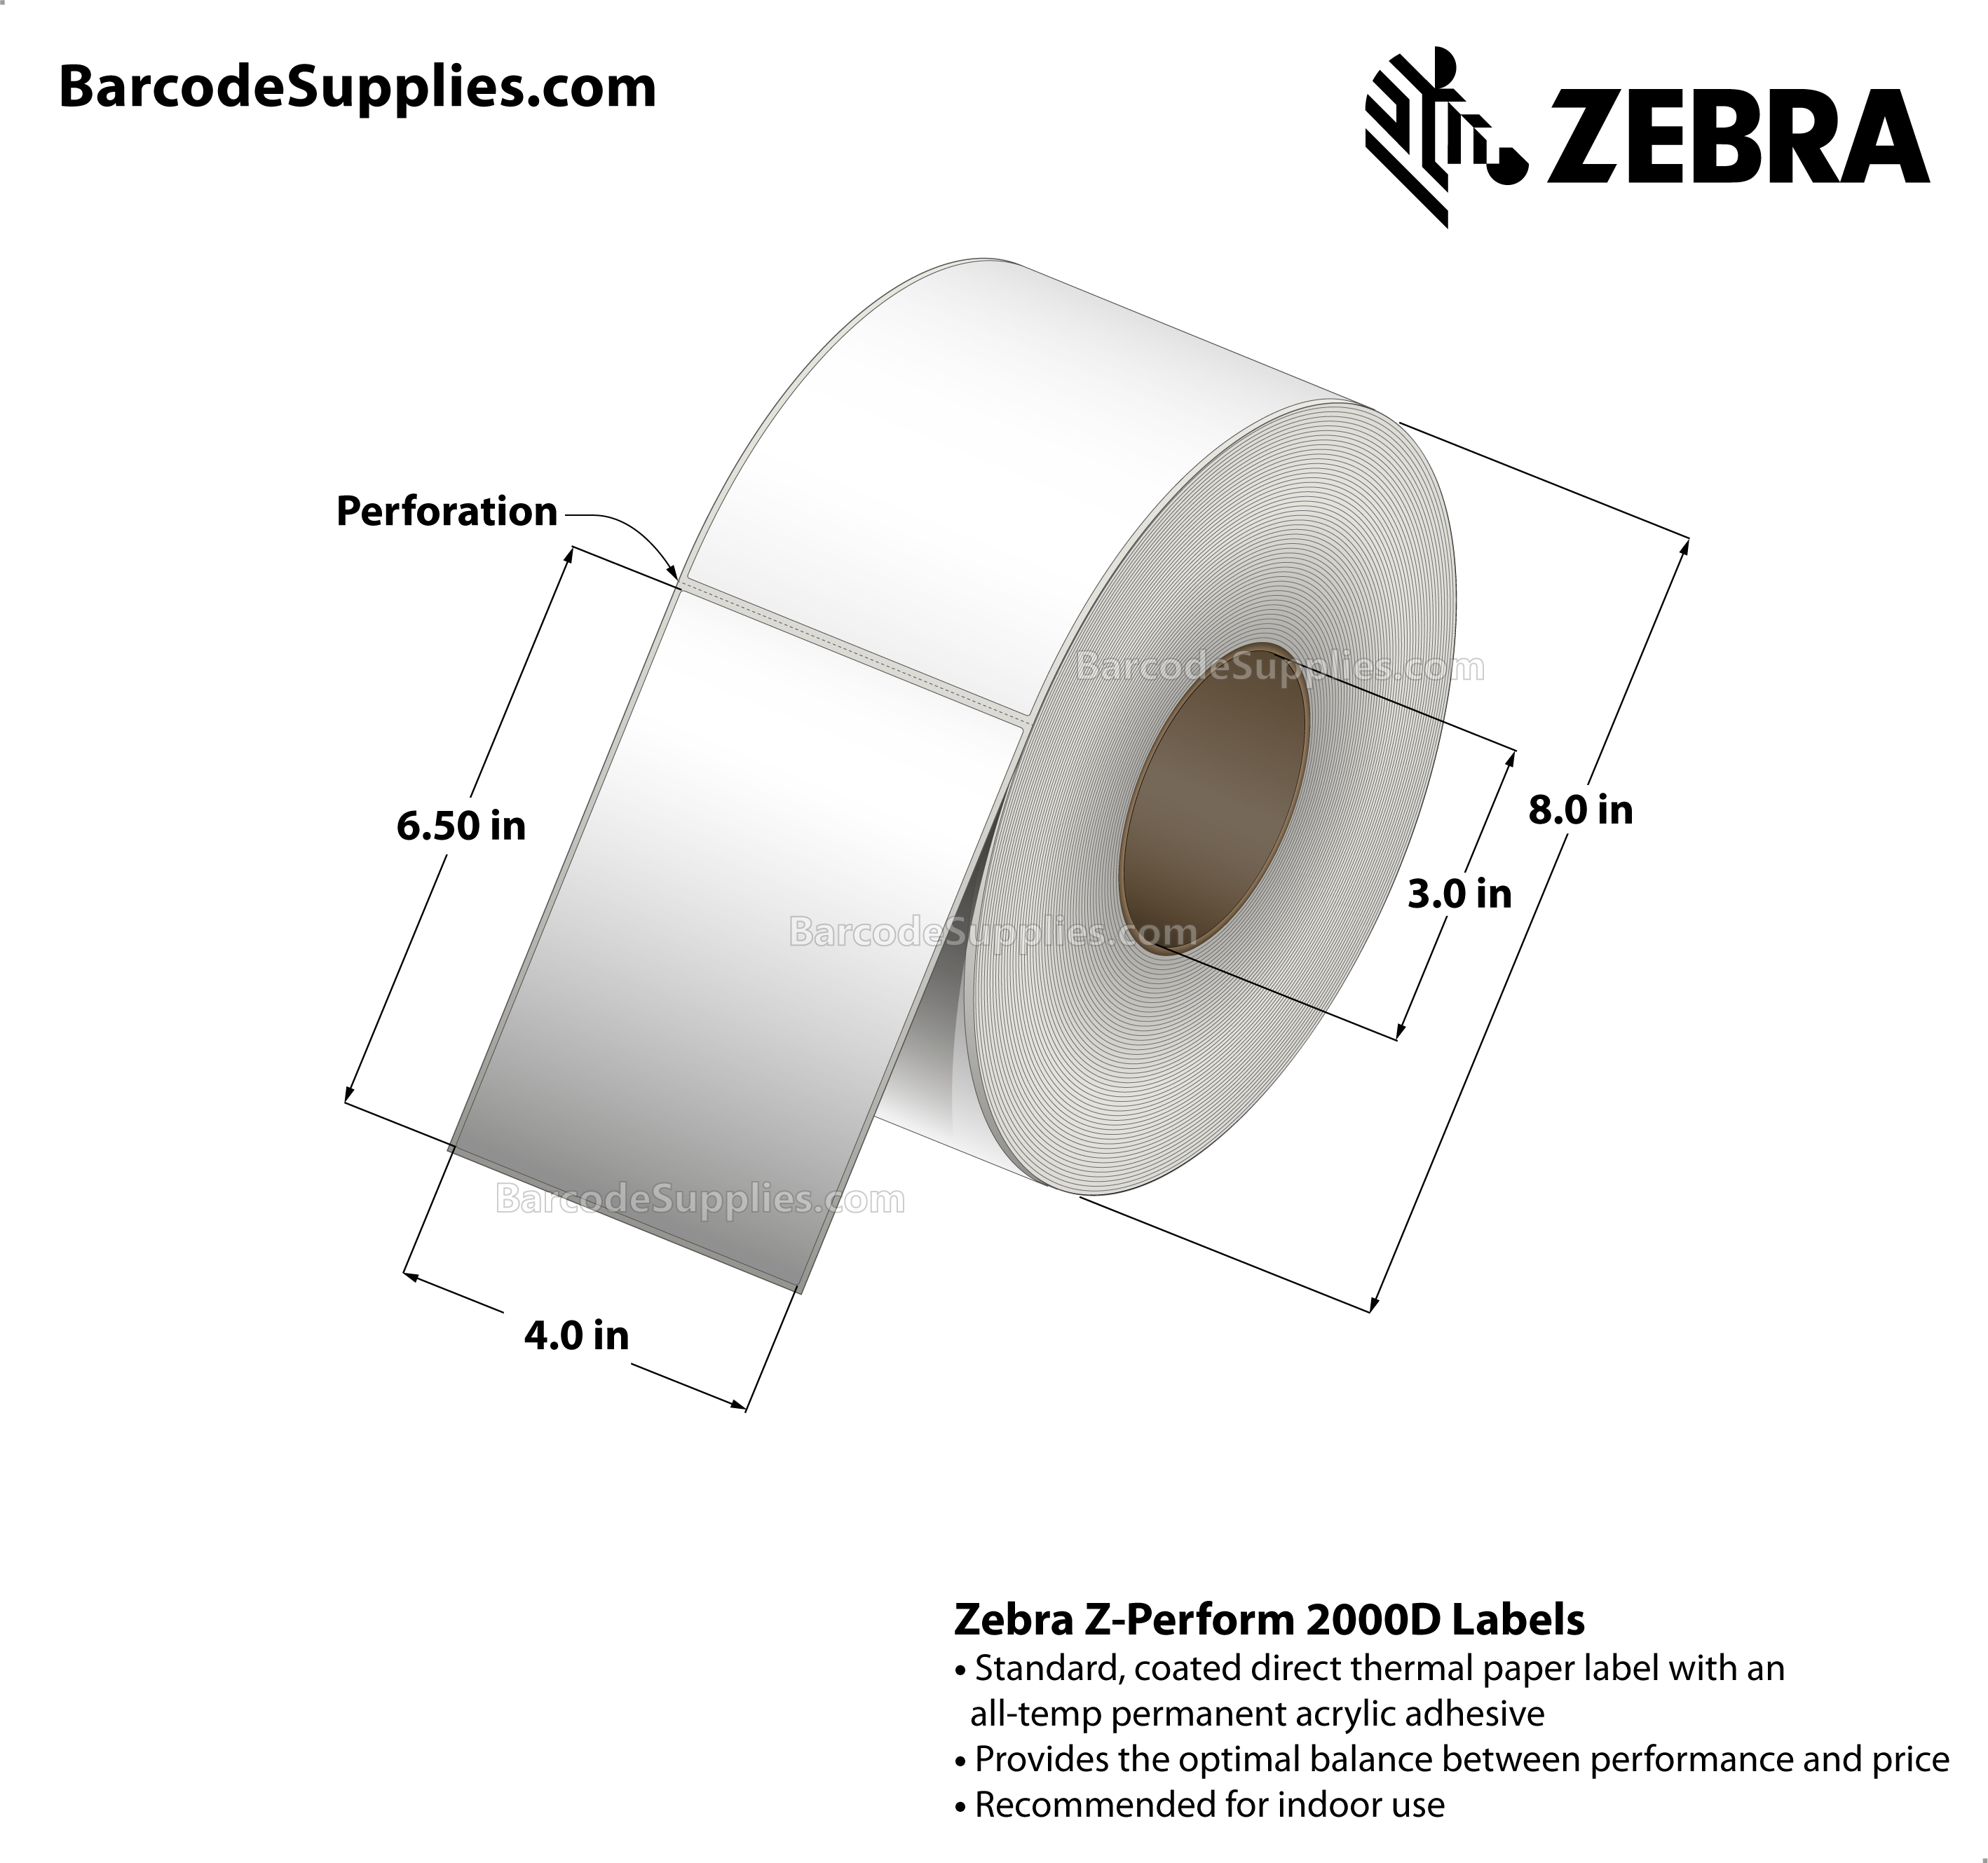 4 x 6.5 Direct Thermal White Z-Perform 2000D Labels With All-Temp Adhesive - Perforated - 900 Labels Per Roll - Carton Of 4 Rolls - 3600 Labels Total - MPN: 10000289